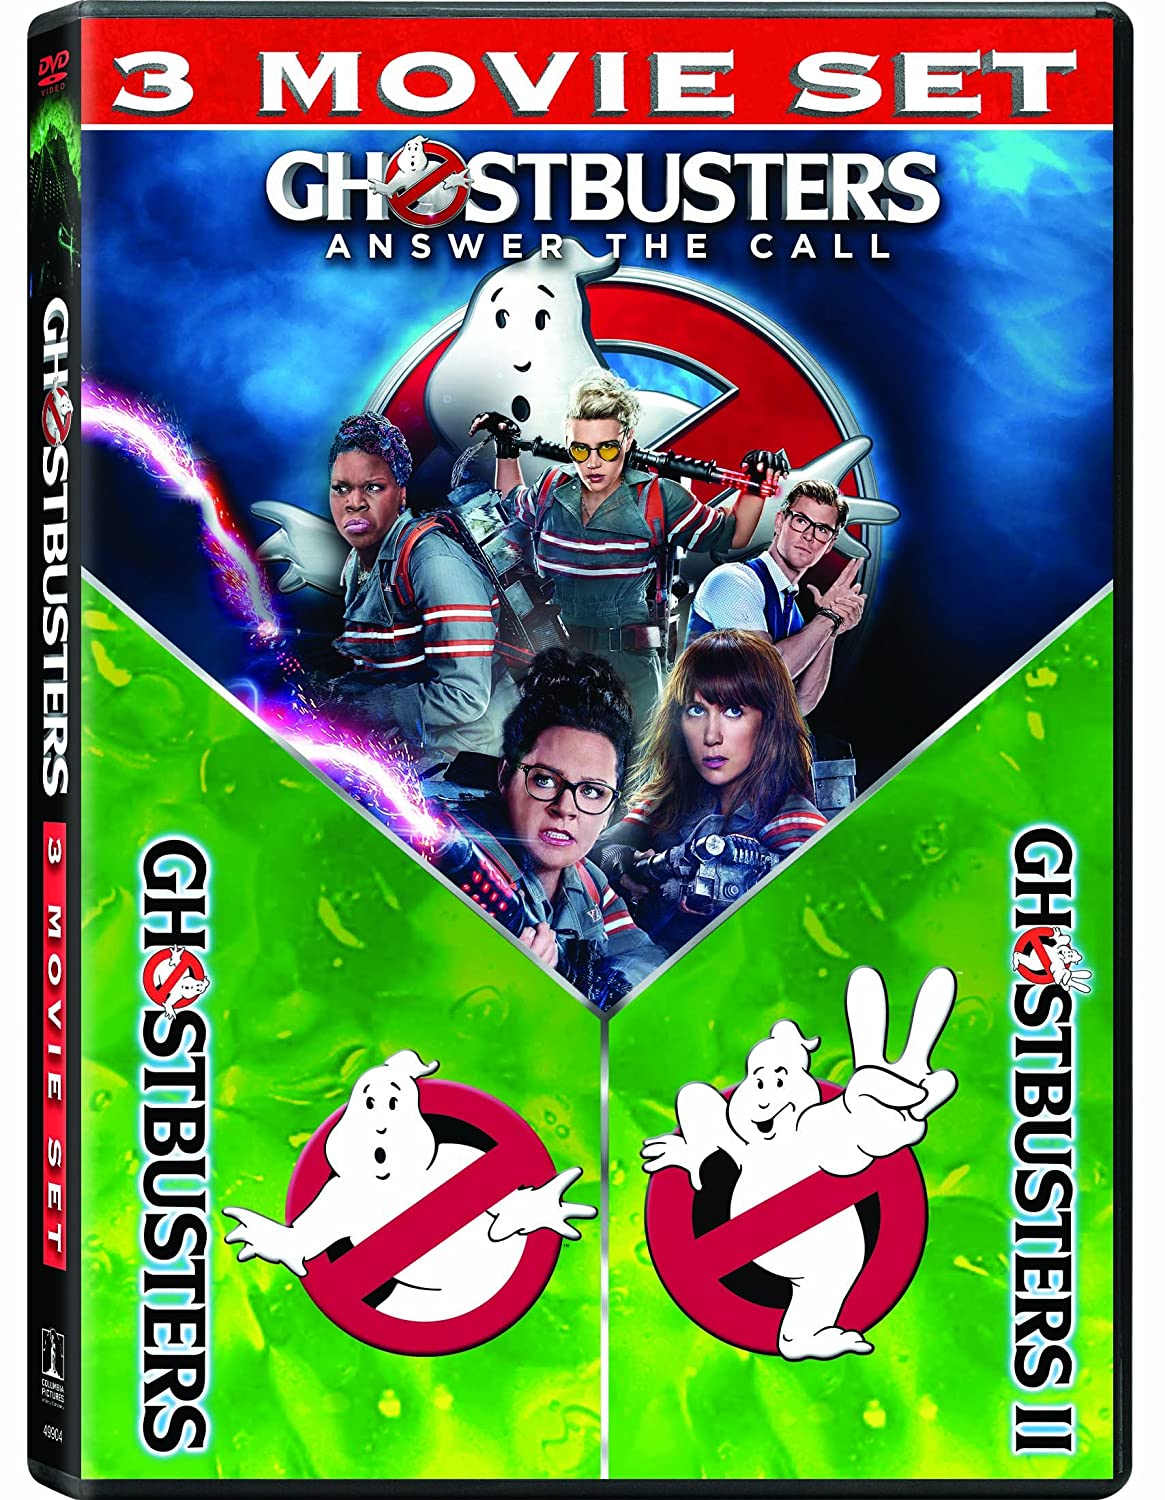 Ghostbusters 3 trailer